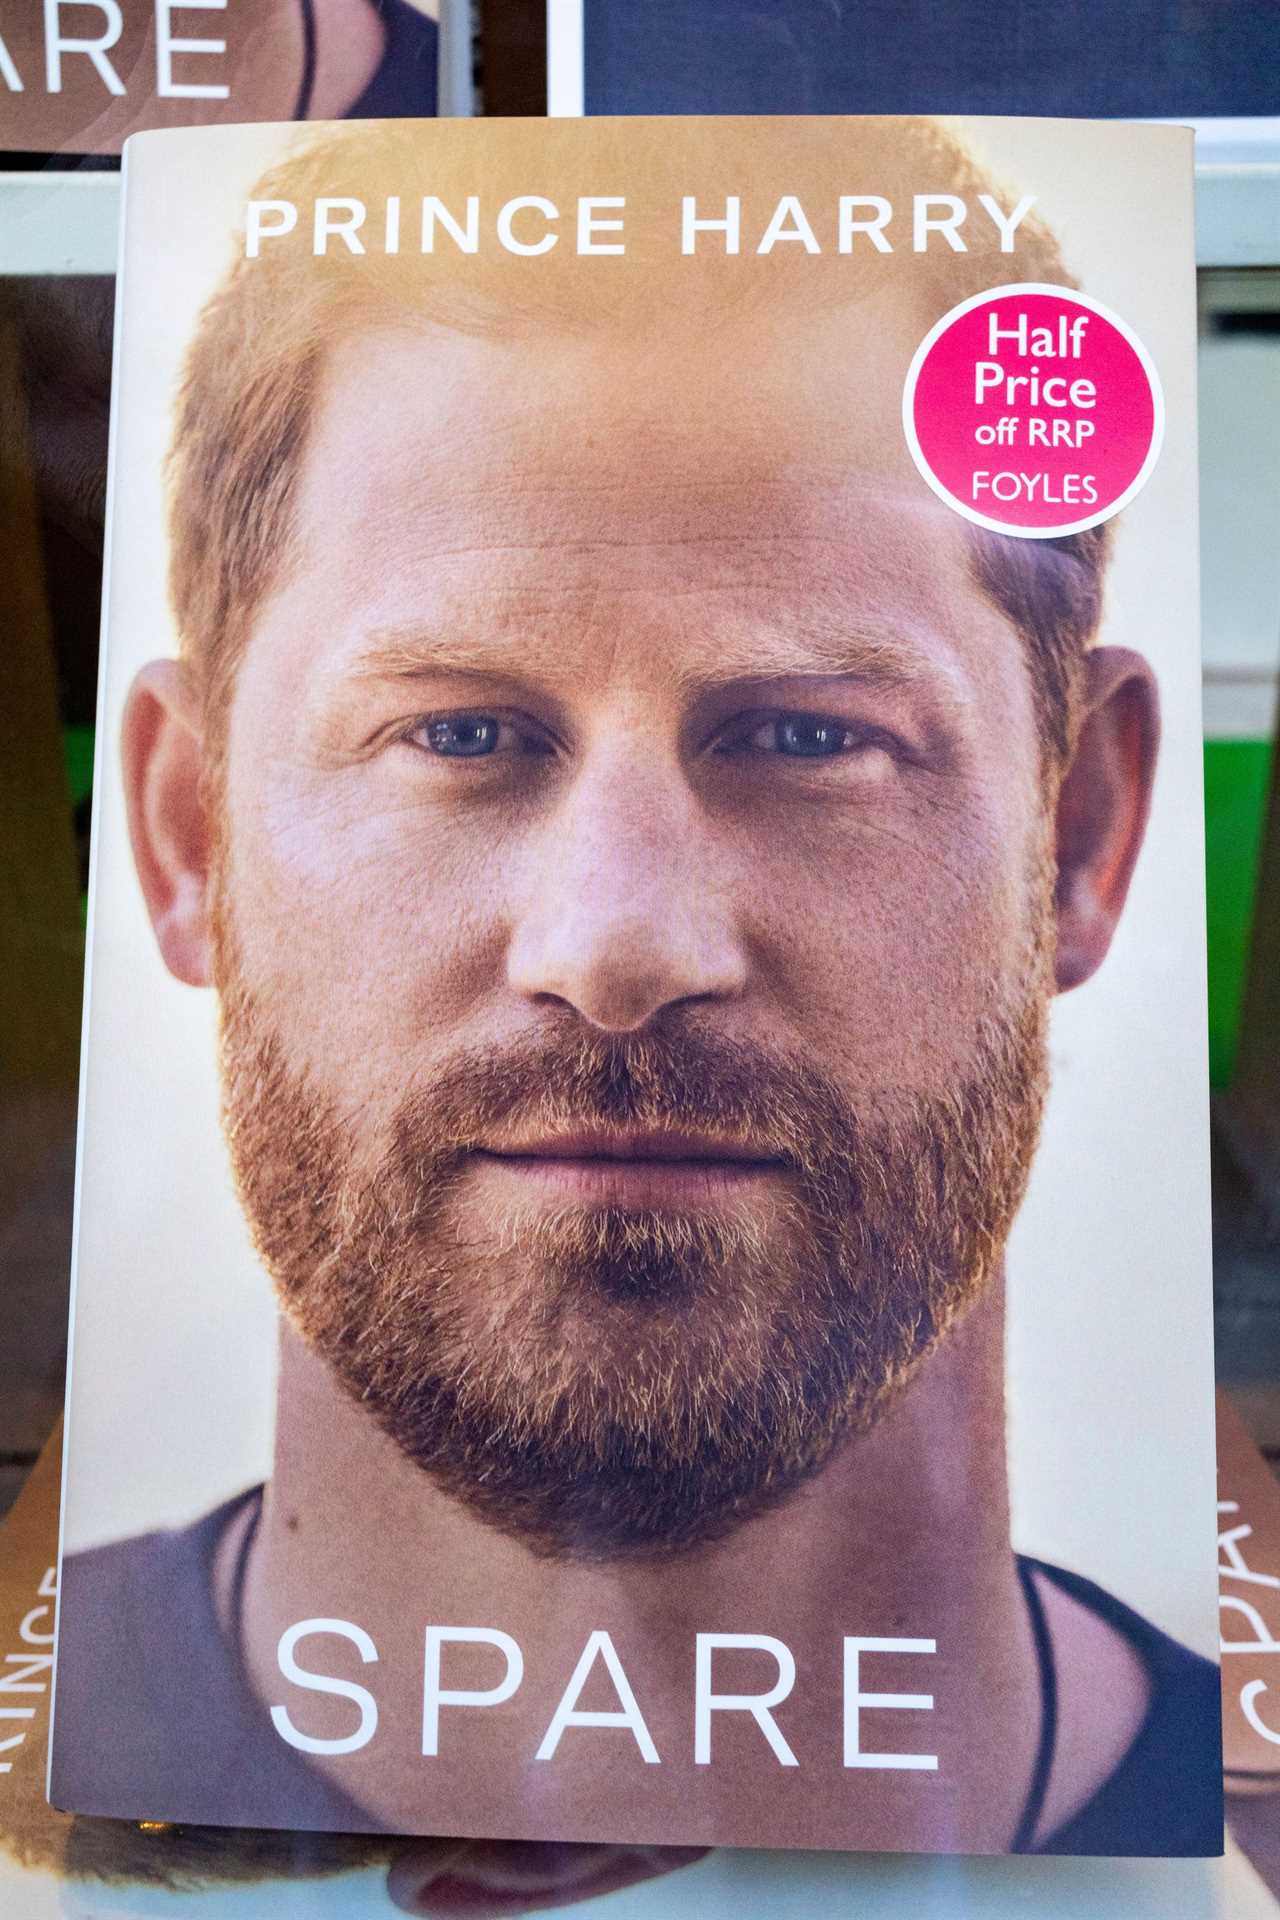 Prince Harry seduced me at my birthday party – he won me a Miss Piggy toy and signed my card with his secret code name